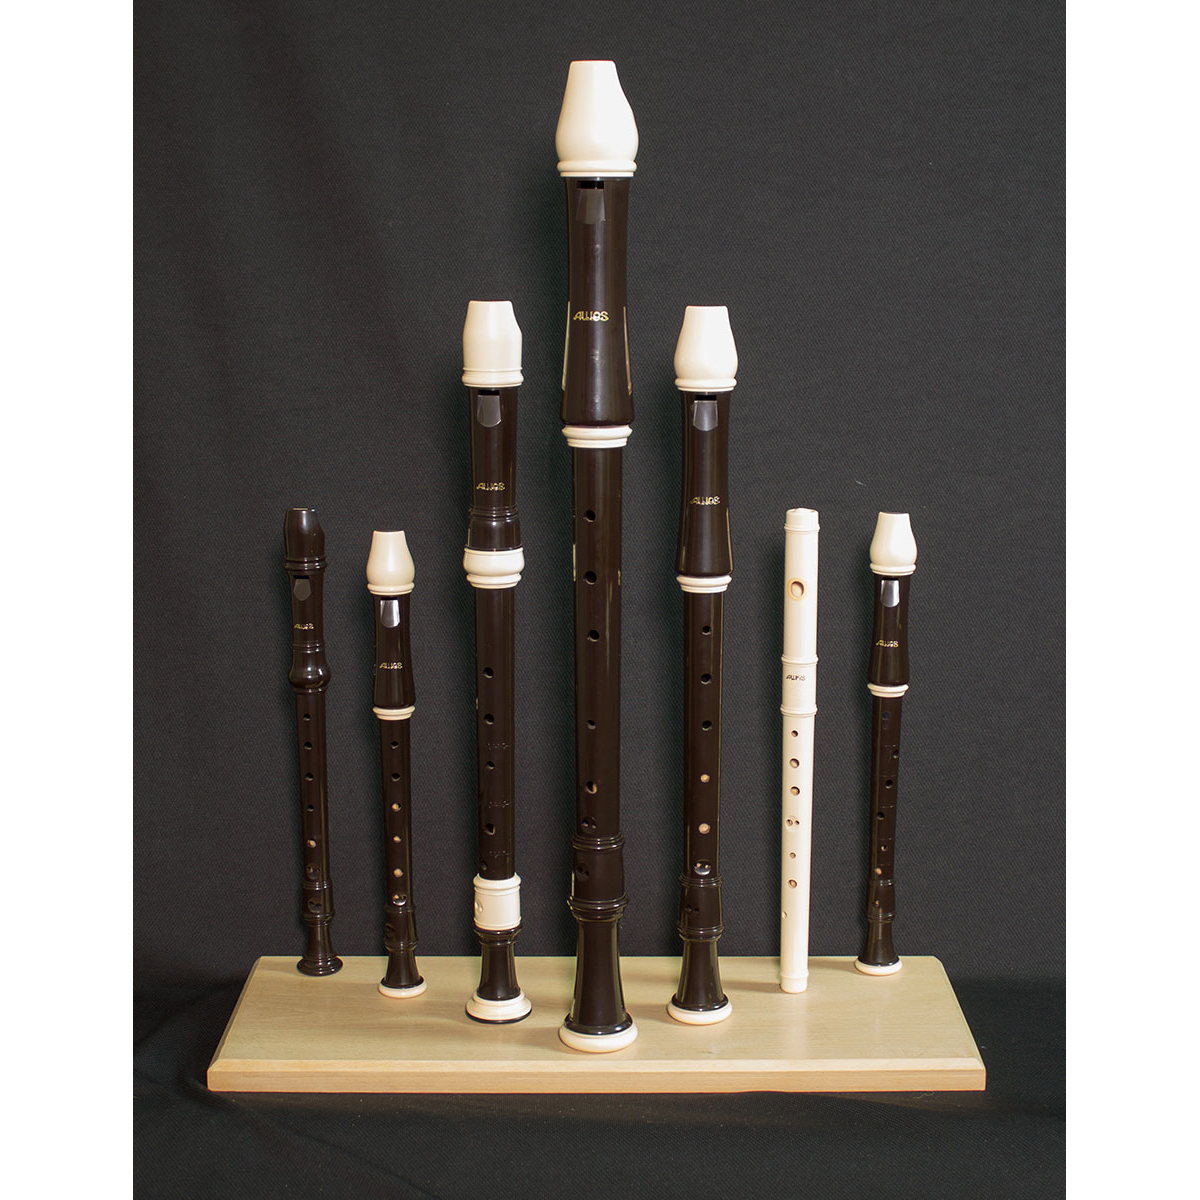 Aulos Recorder Display Stand